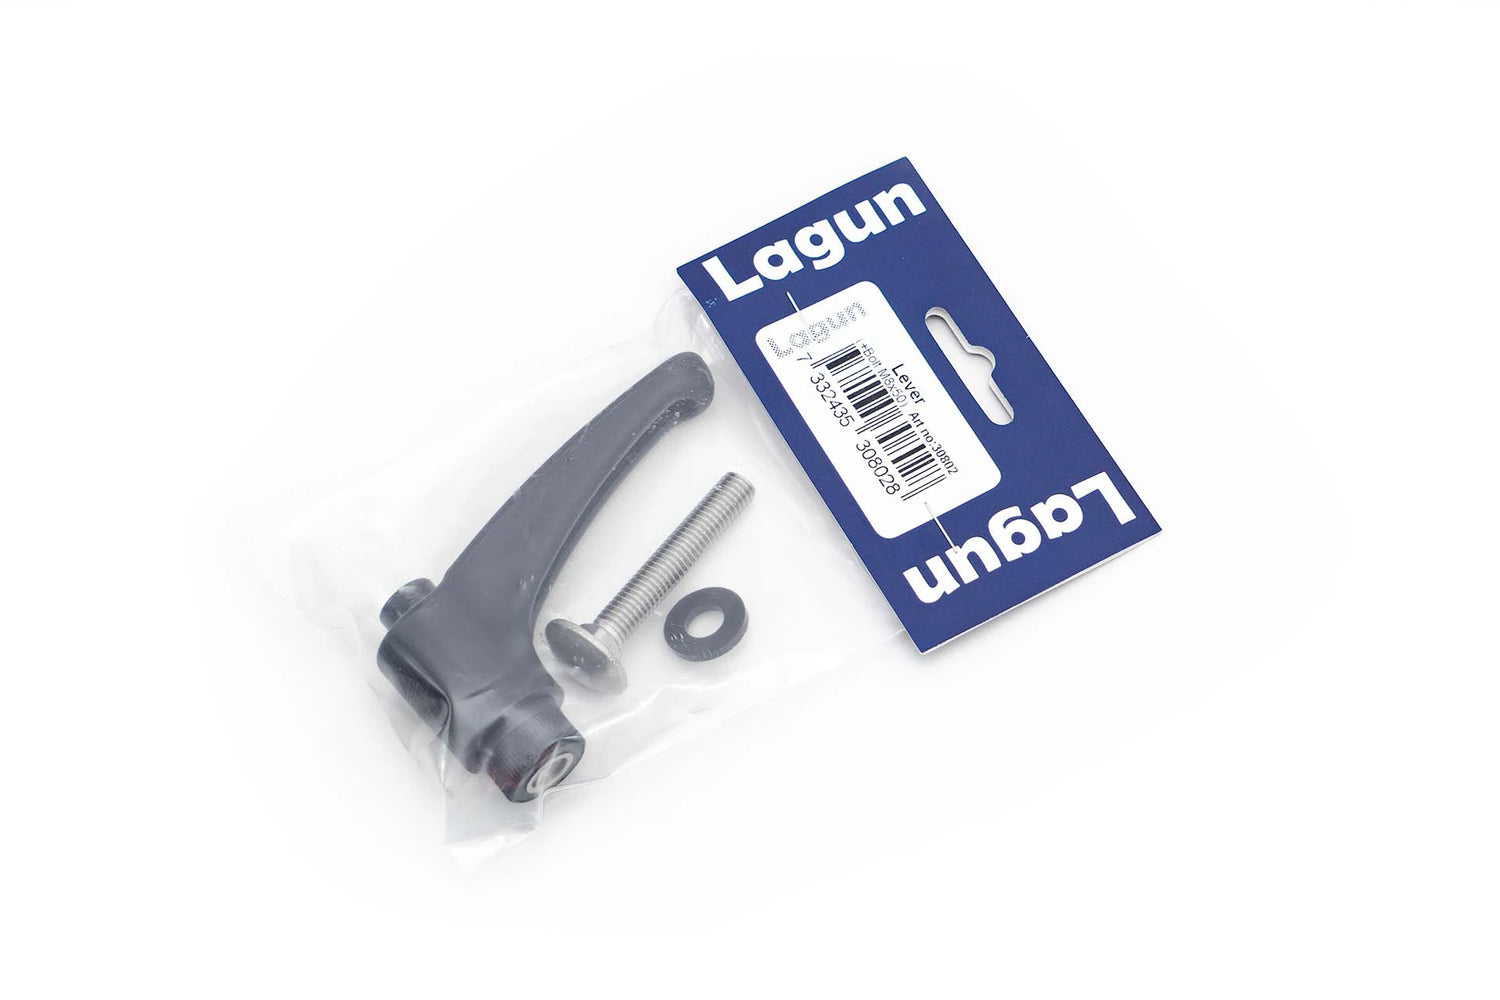 Lagun replacement handle with screw